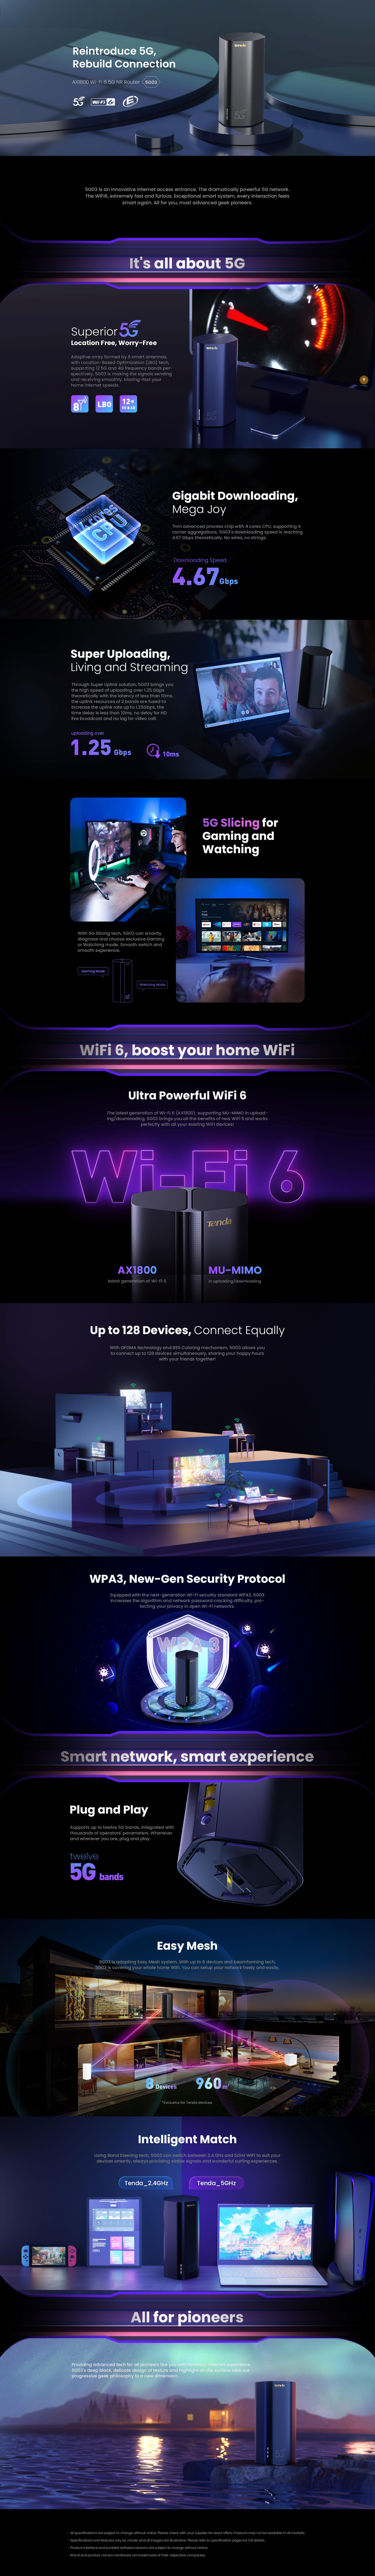 A large marketing image providing additional information about the product Tenda AX1800 Wi-Fi 6 5G NR Router - Additional alt info not provided